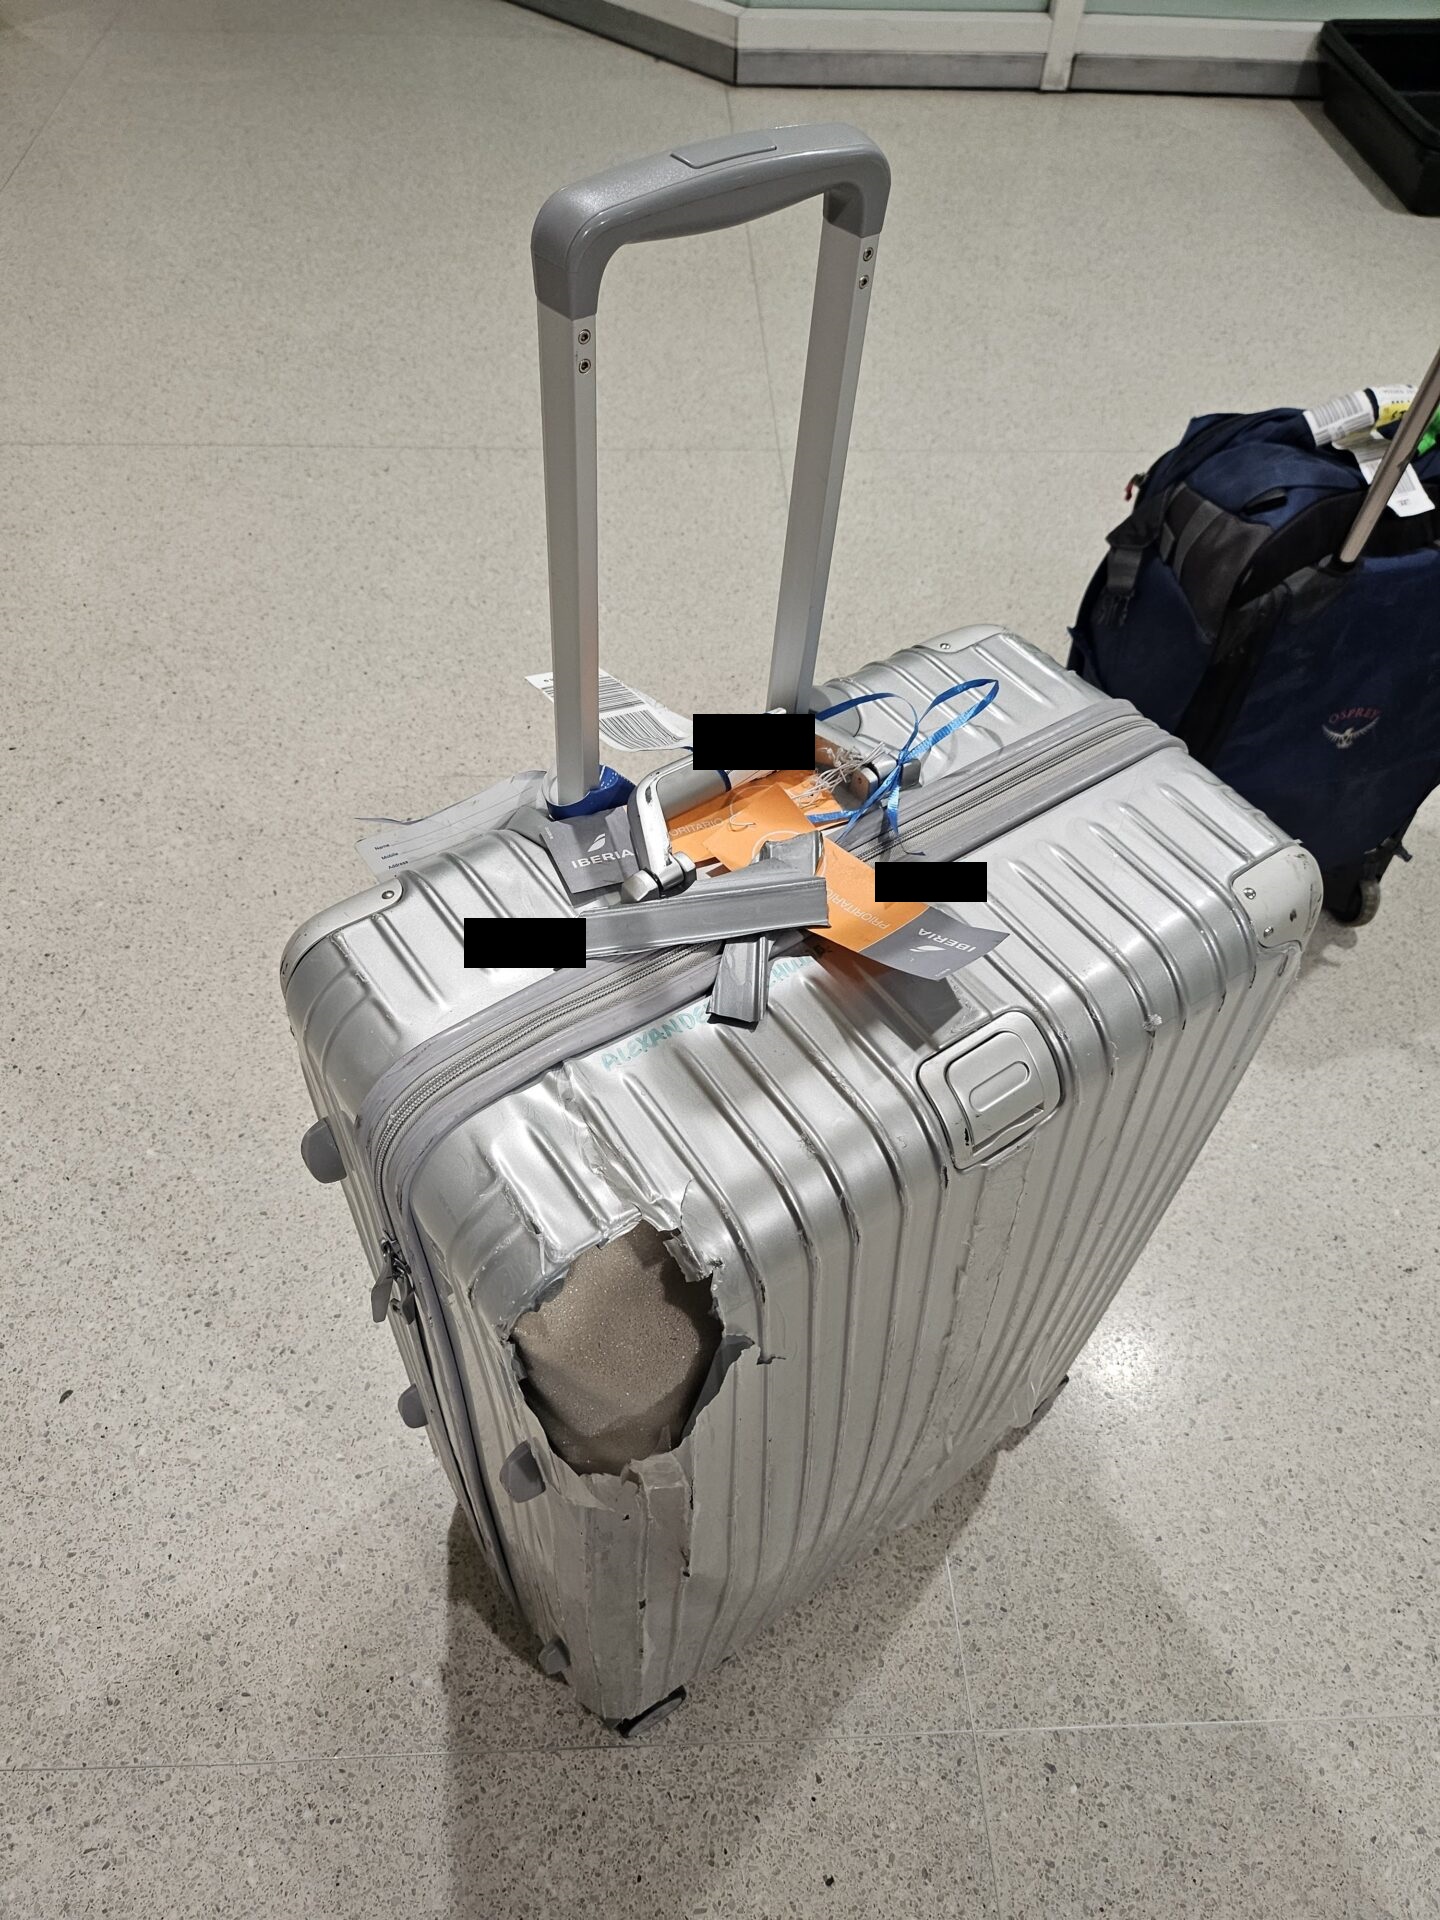 a broken suitcase with a handle